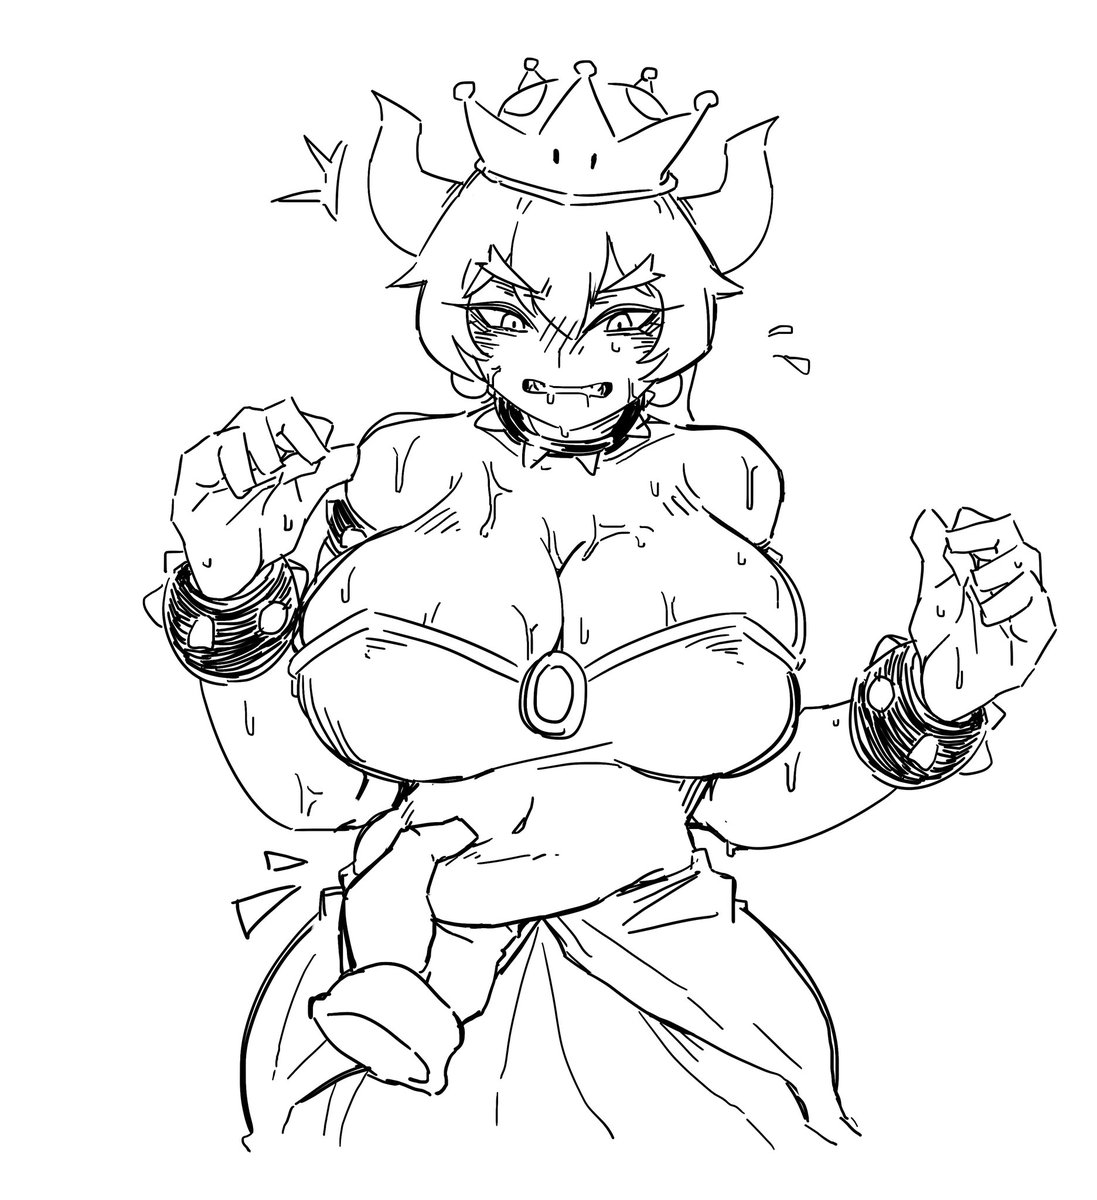 Actually I draw bowsette whenever I got a terrible slump with drawing.

Also I get a slump very often...? 